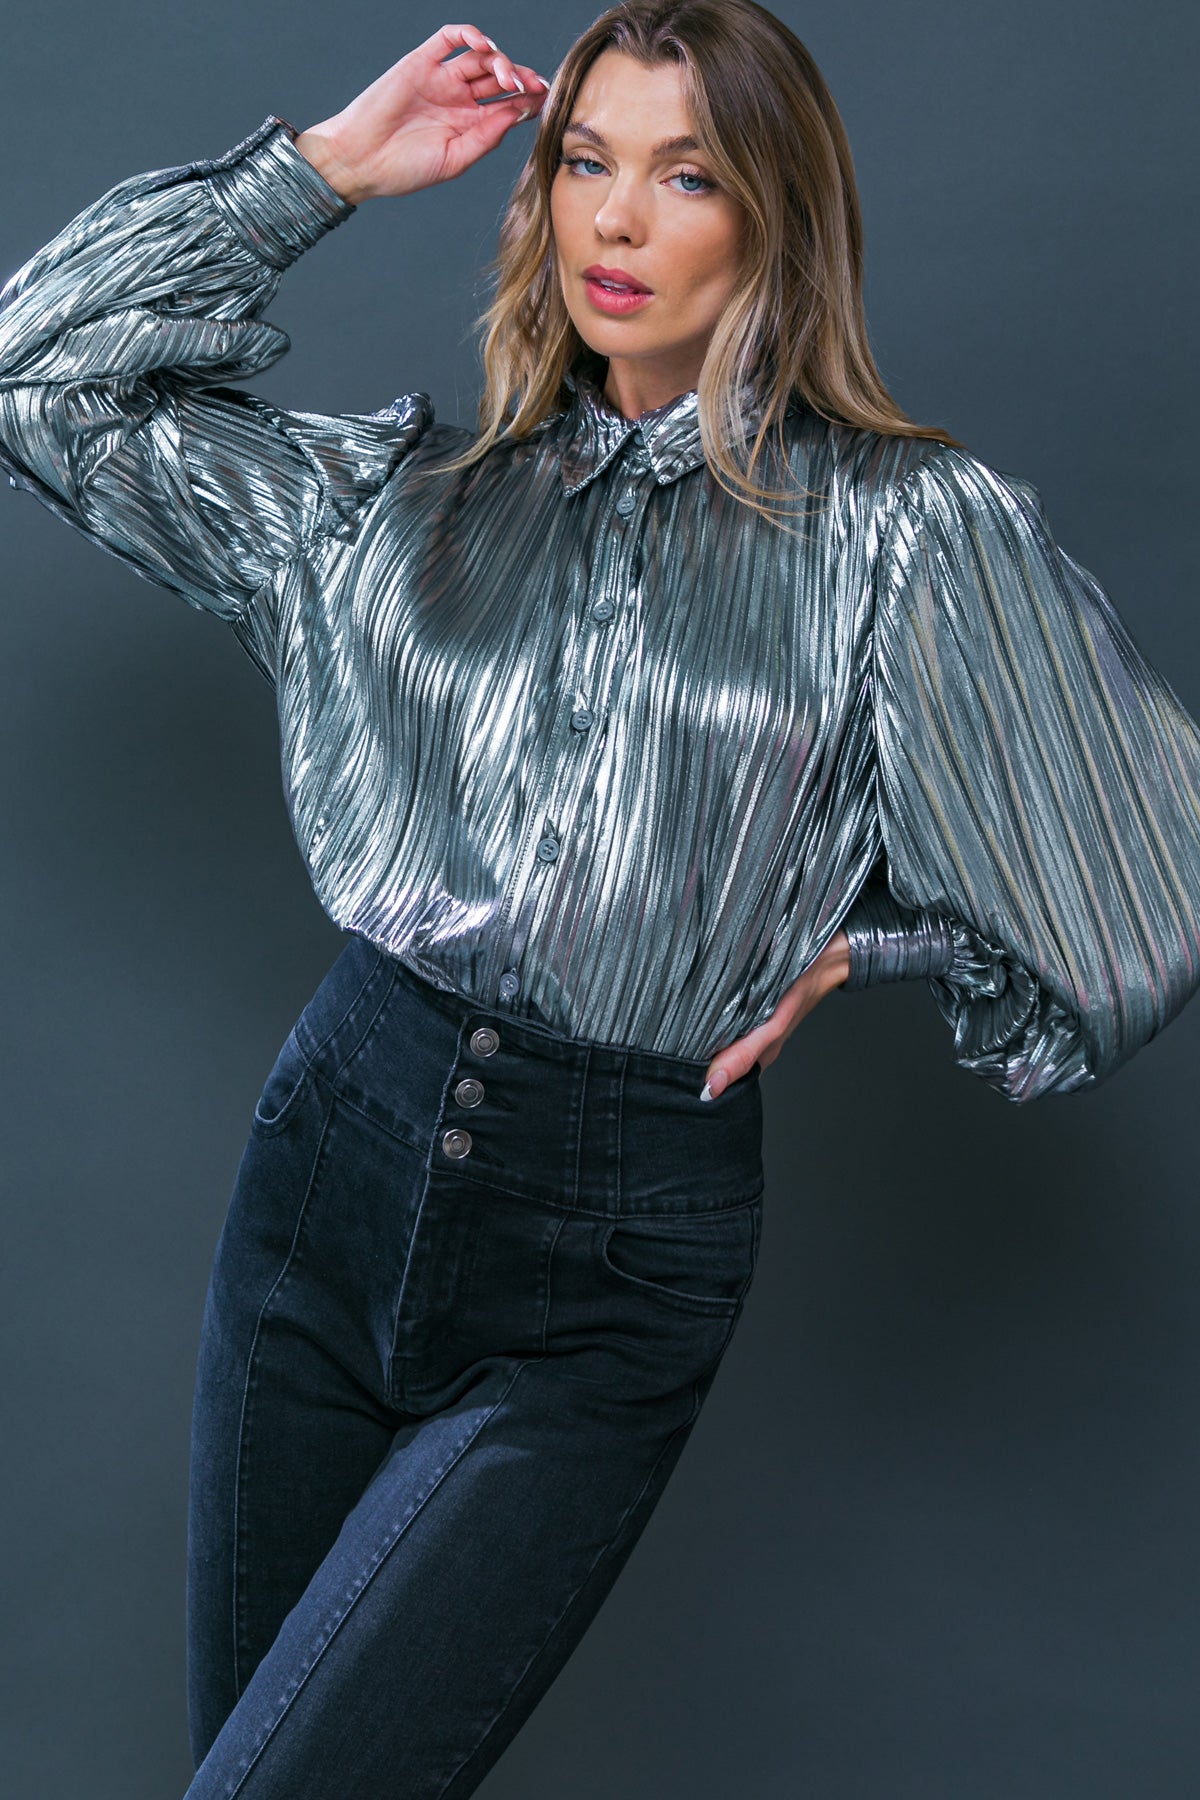 Rock the party with the Cheers! Top! This sparkling pleated piece features a classic shirt collar fit, button down closure, and long sleeves with cuffs for a look that will shut it down. Shine bright and show up in style for your next night out!